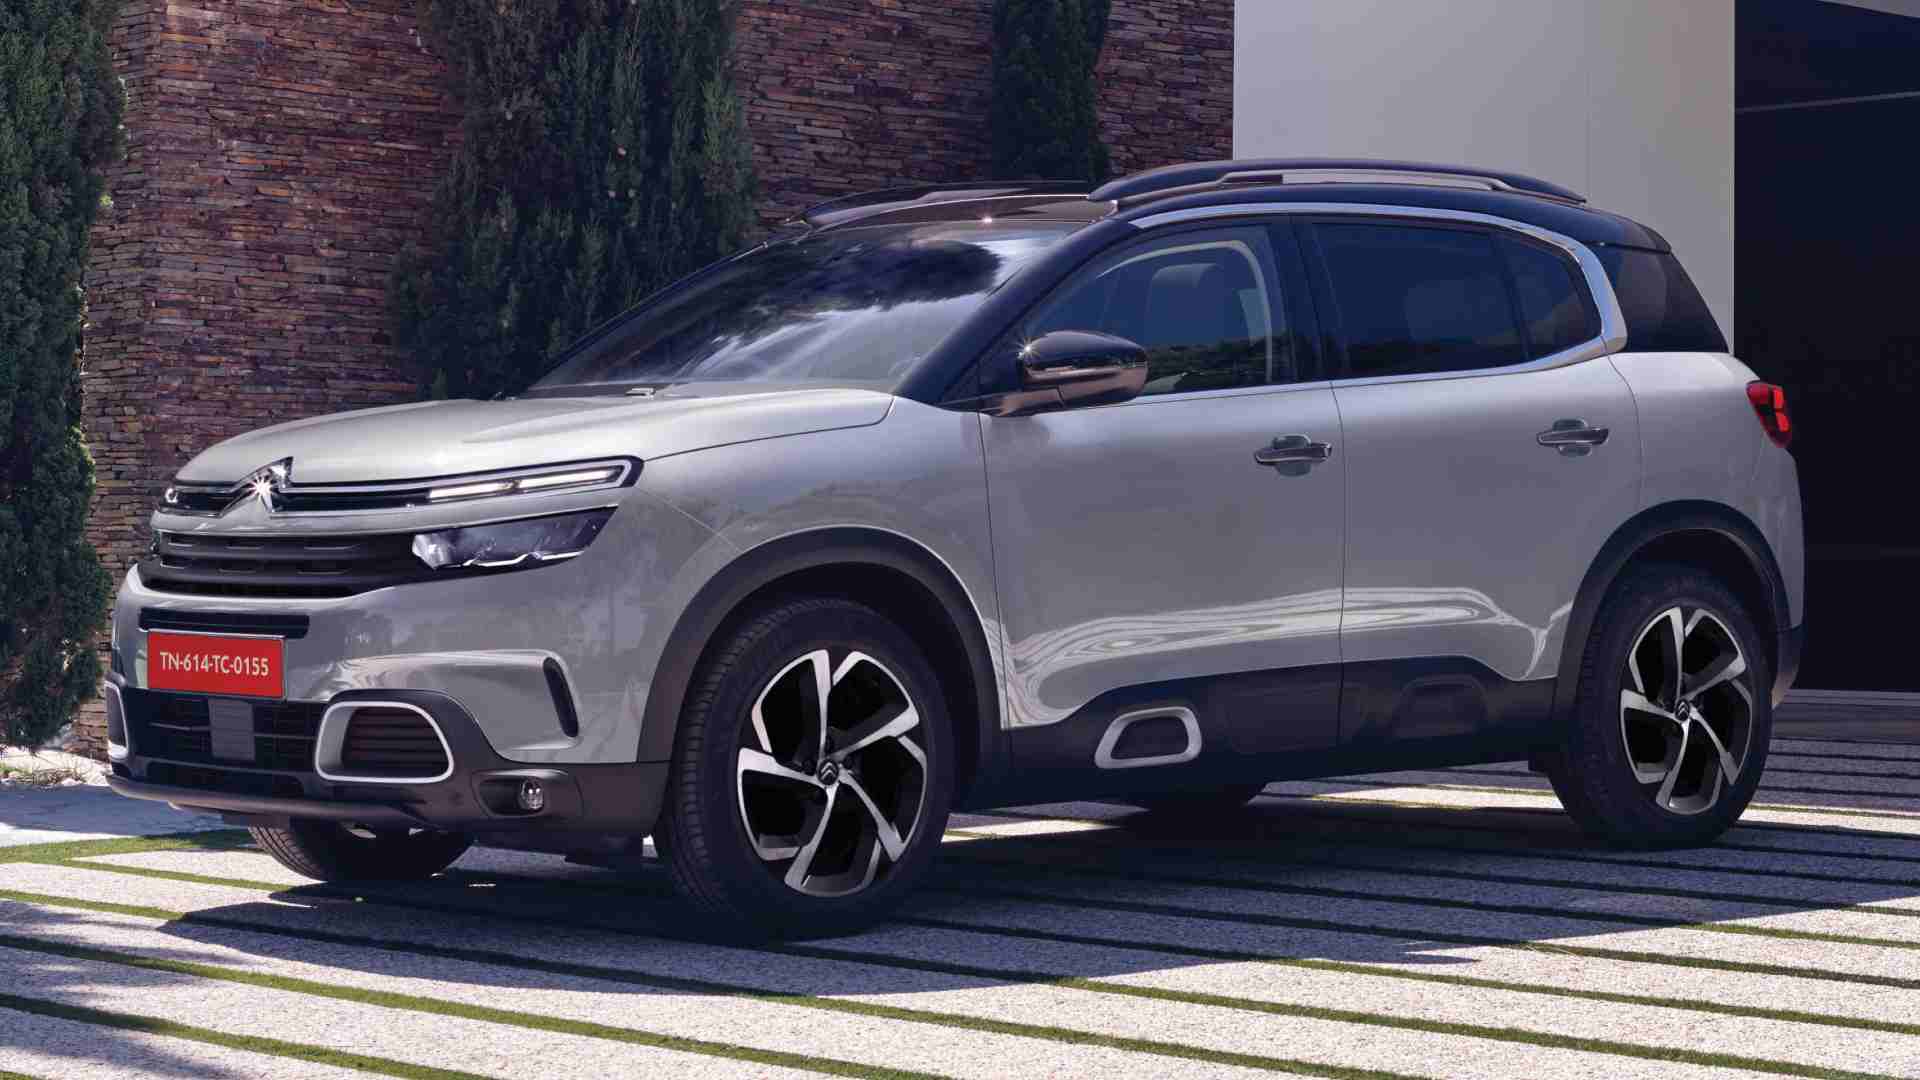  Citroen C5 Aircross launched in India at introductory starting price of Rs 29.90 lakh